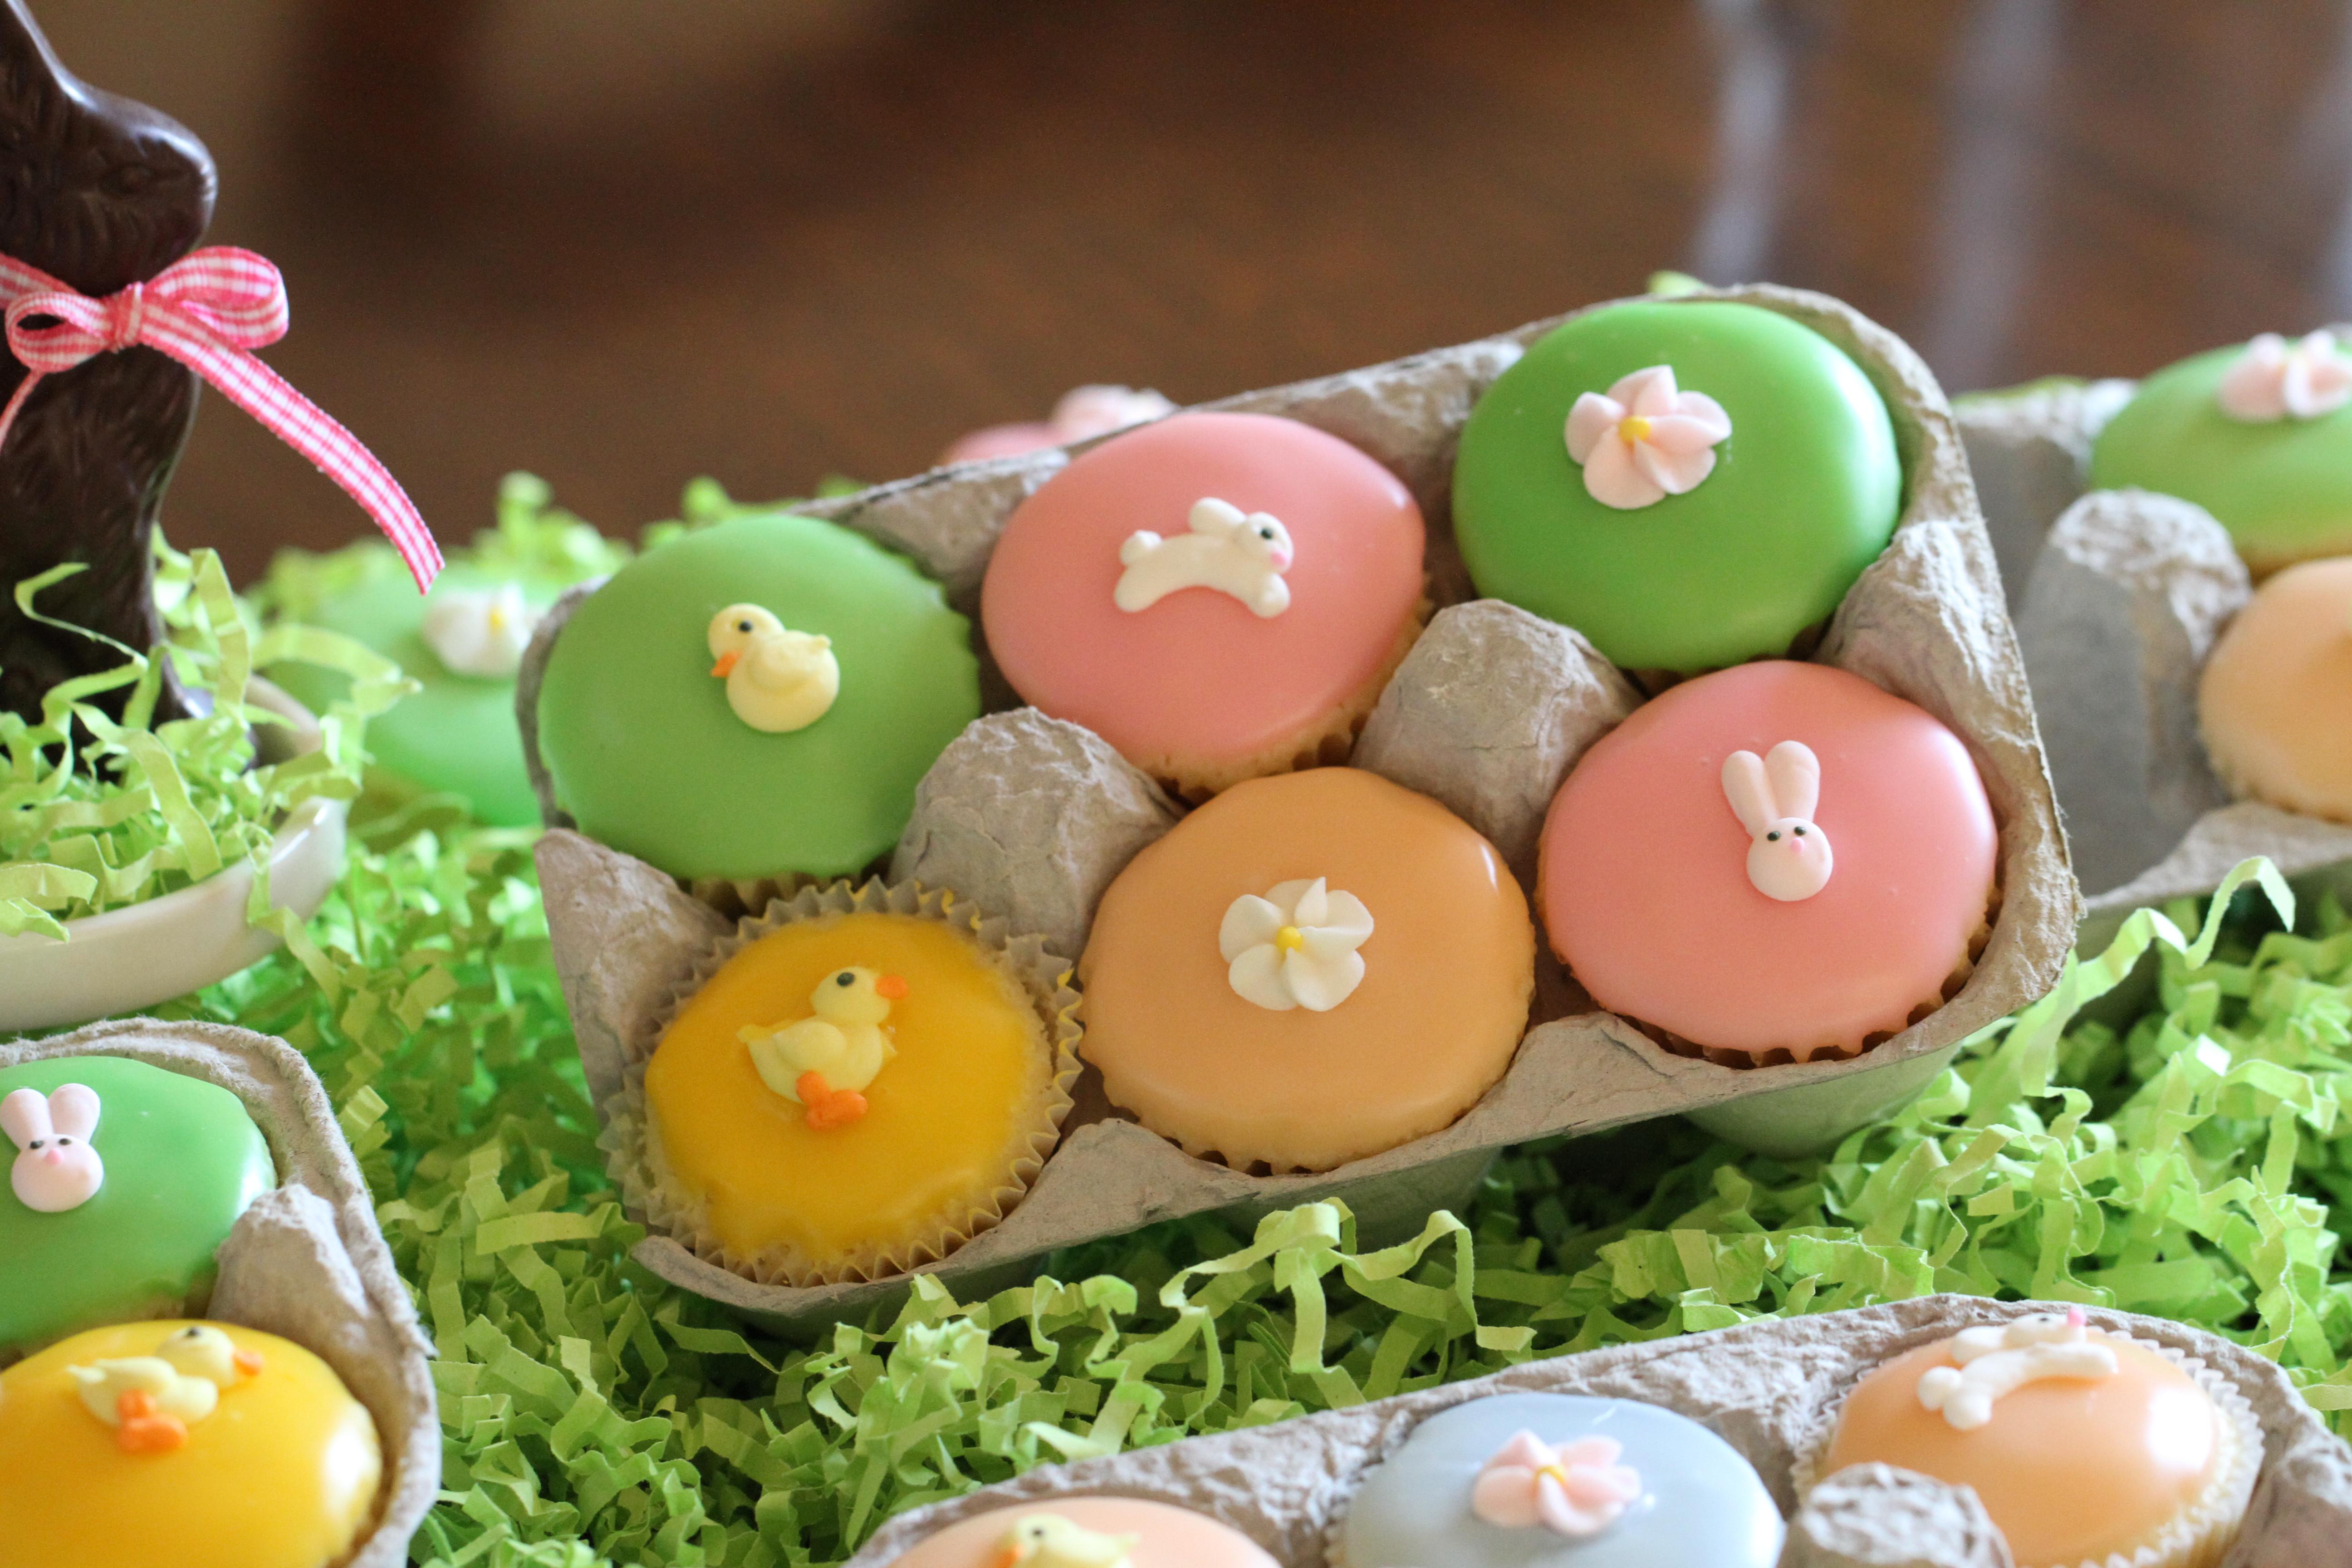 Cute Easter Cupcakes
 "The Cutest" Easter Cupcakes